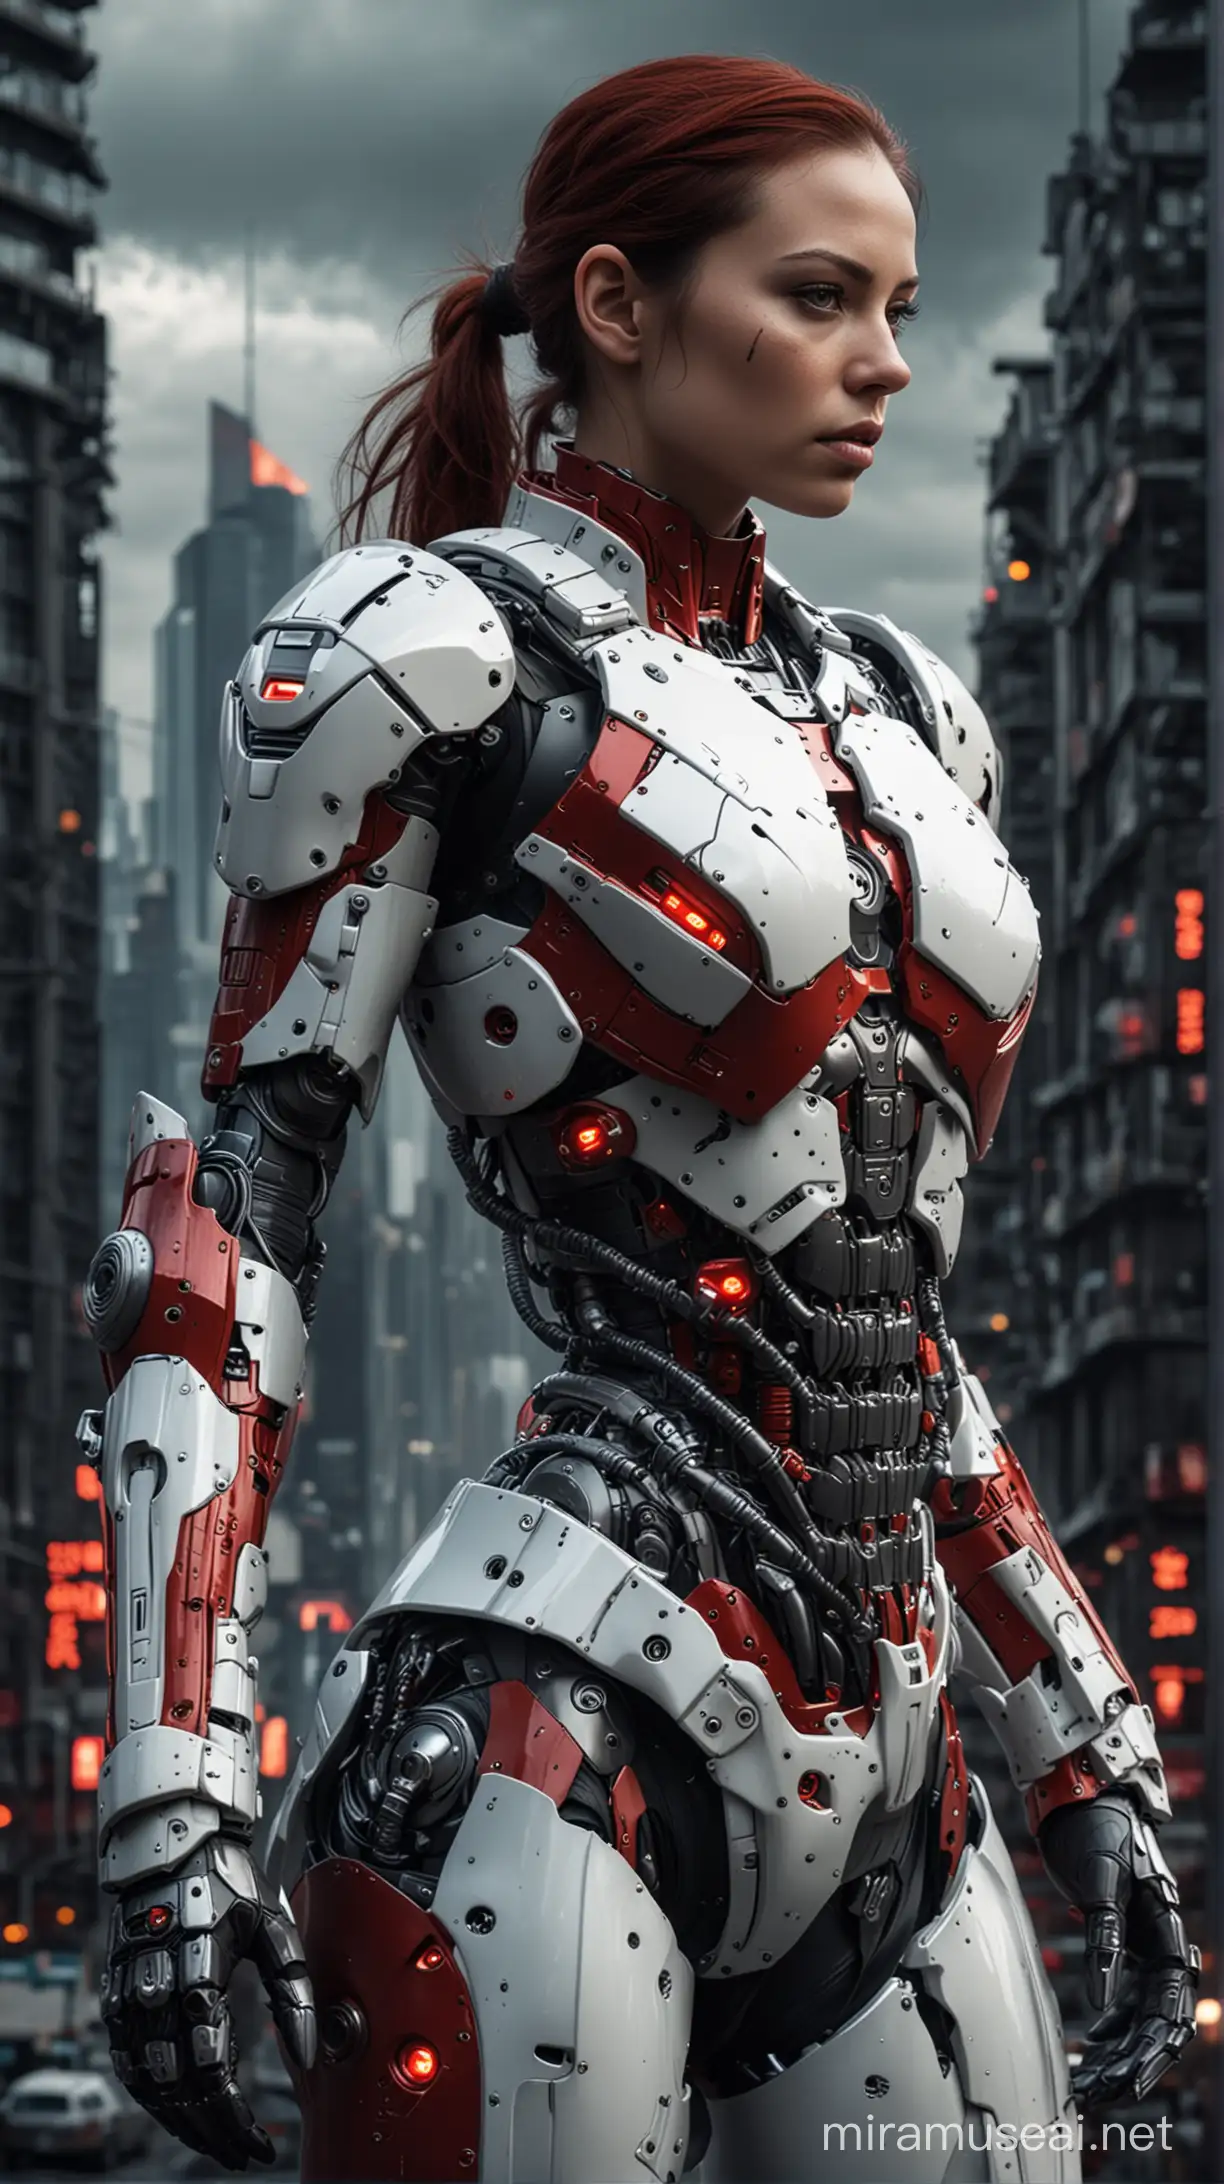 Cyborg Woman in Red Armor Suit in Dark Apocalyptic Cityscape